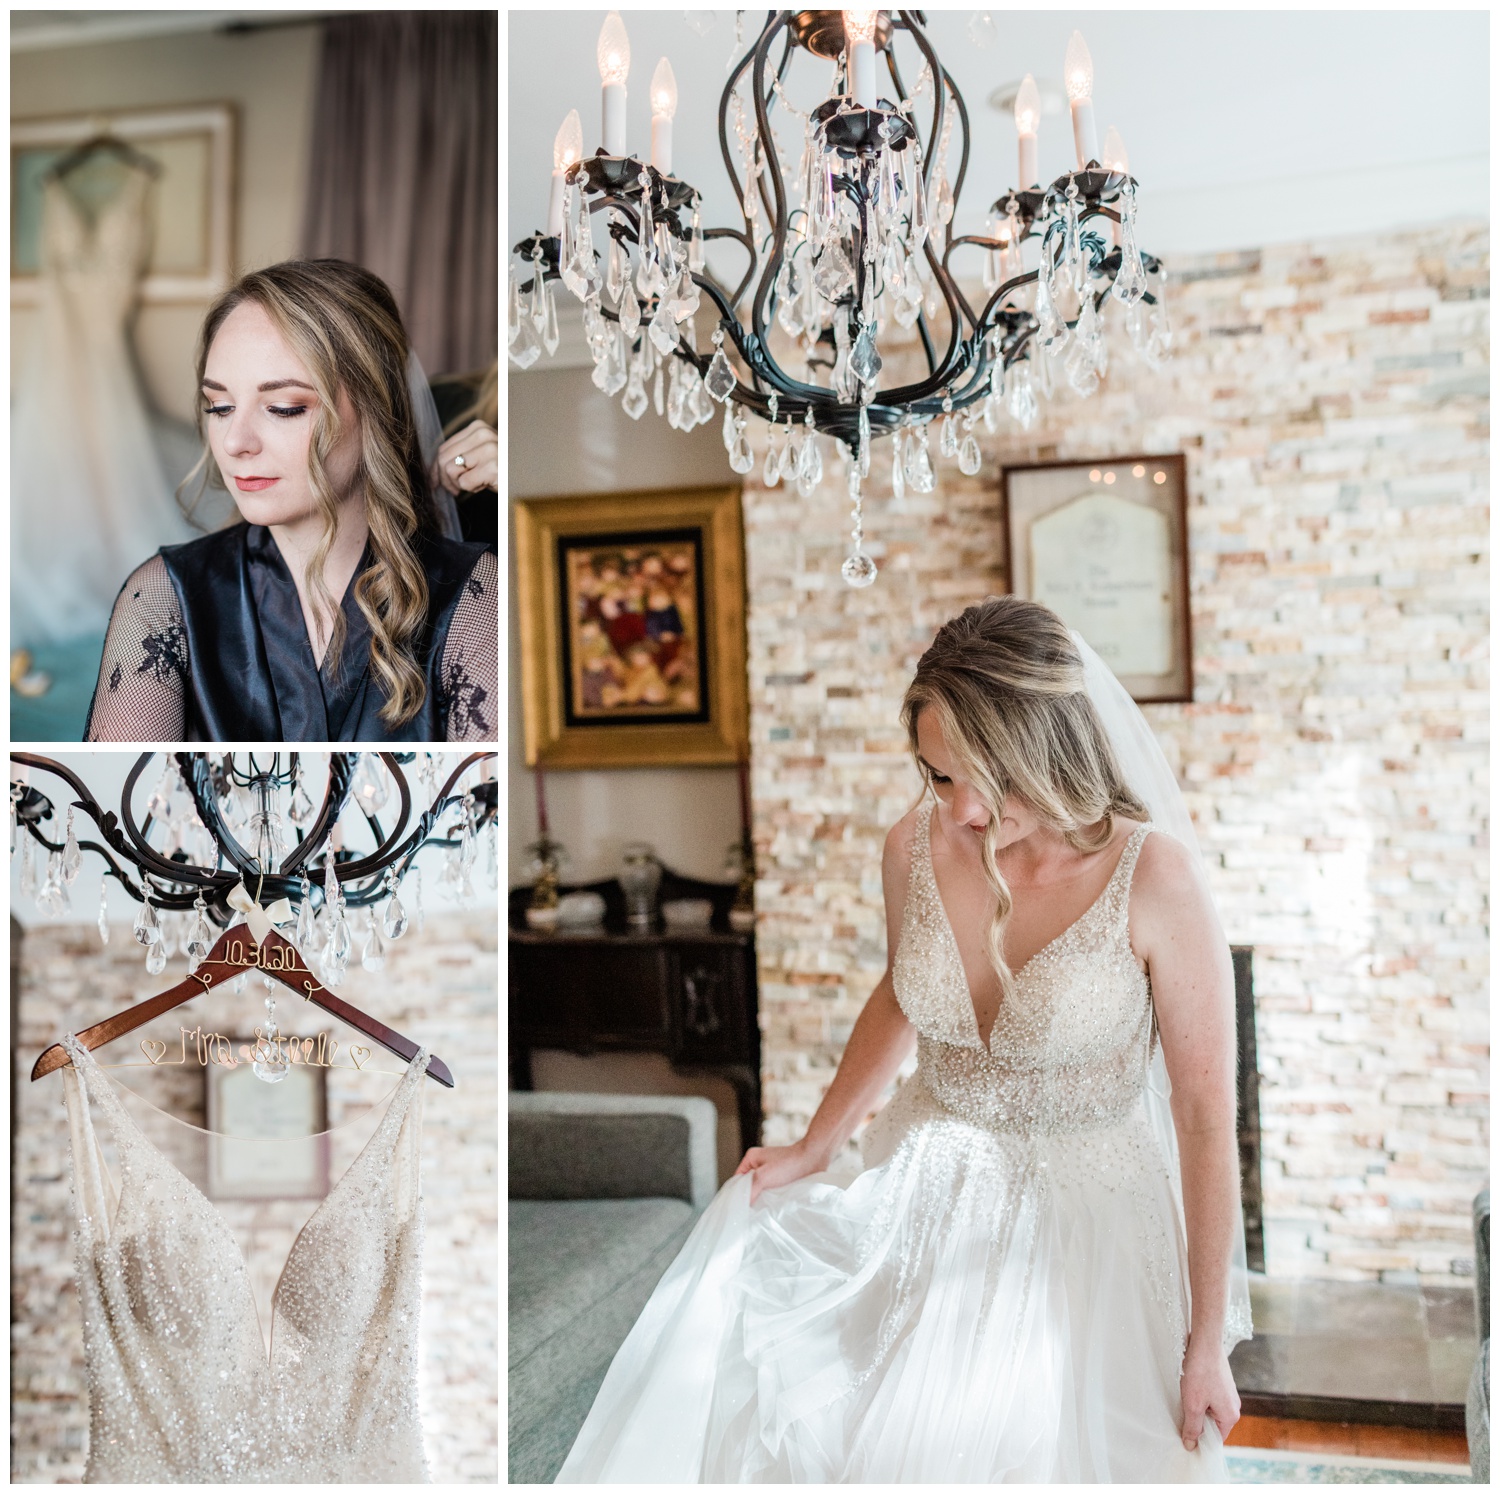 Getting ready photos with the Savannah Elopement Package